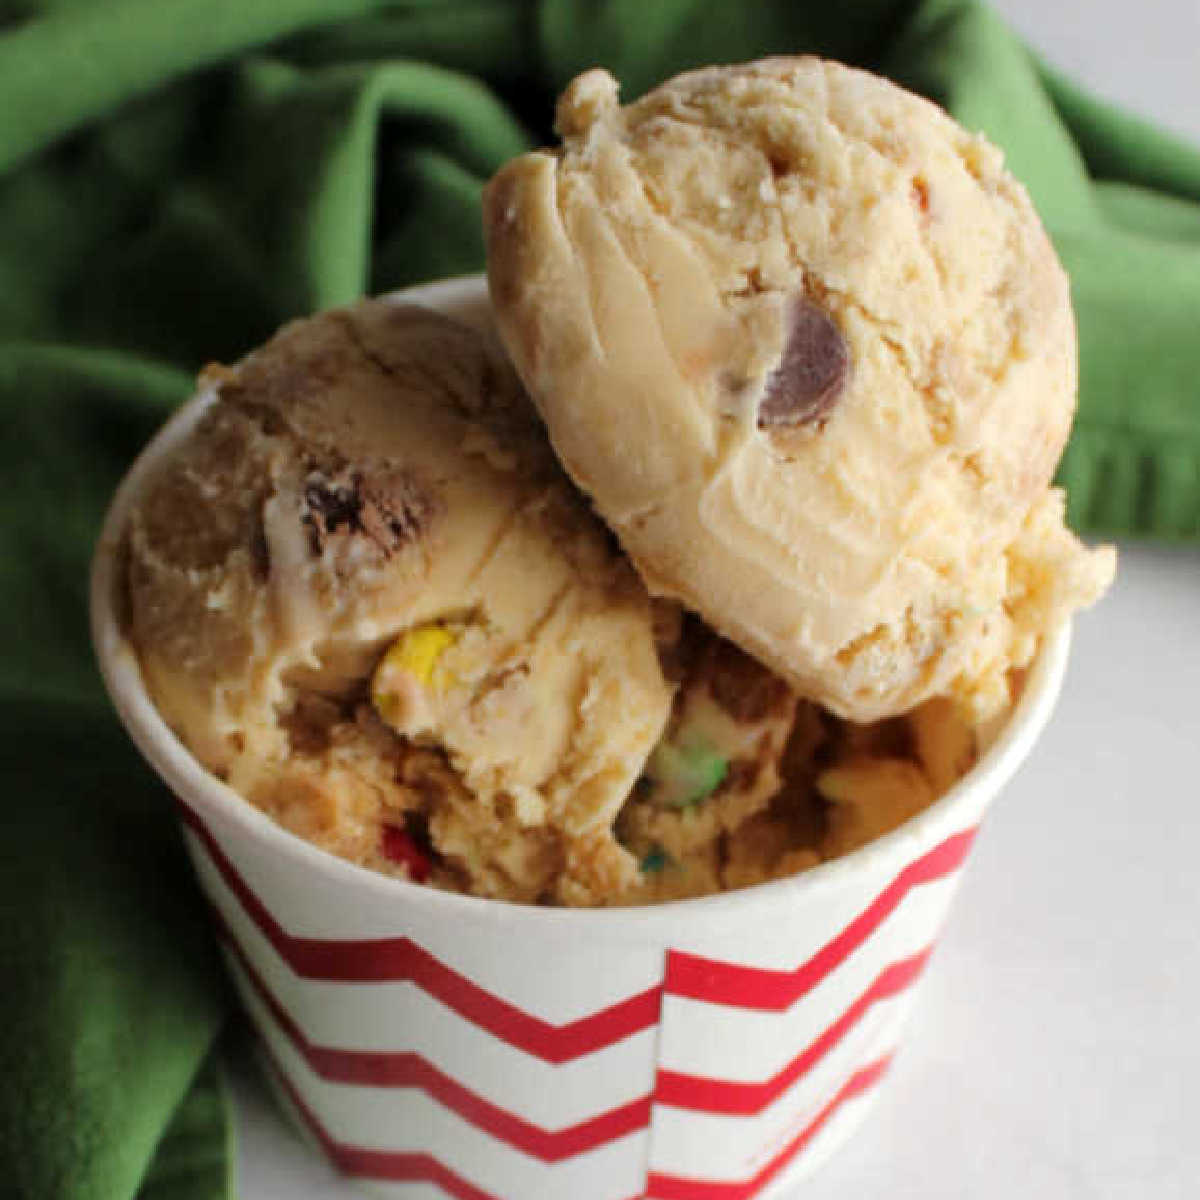 scoops of monster cookie dough with peanut butter, oatmeal and candies inside.